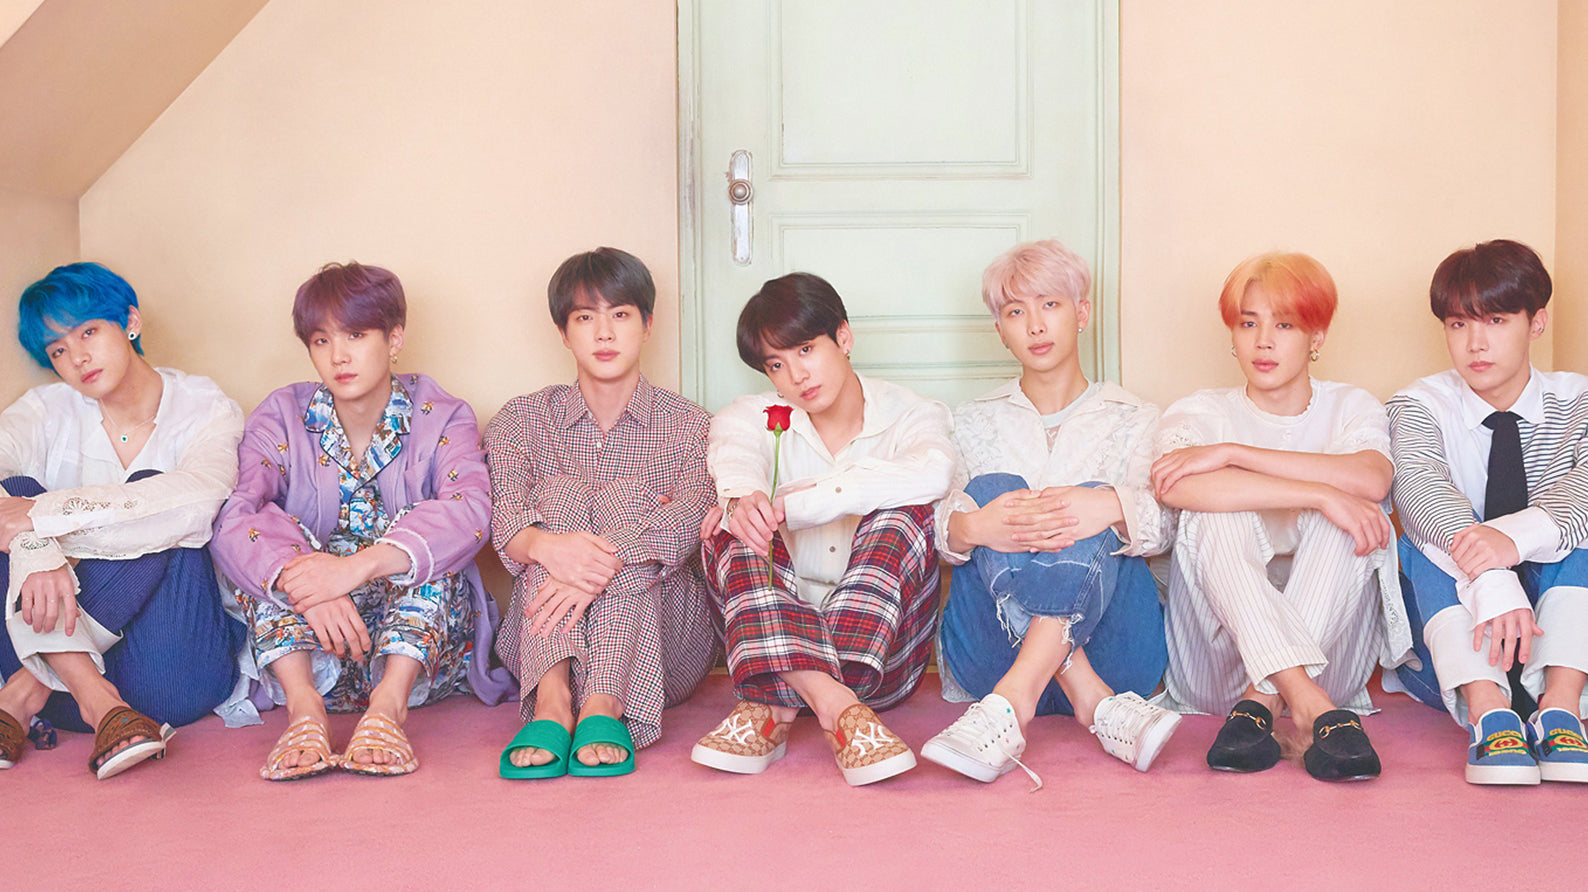 BTS: "MAP OF THE SOUL: PERSONA" becomes the best-selling album of all history in South Korea in just a few hours